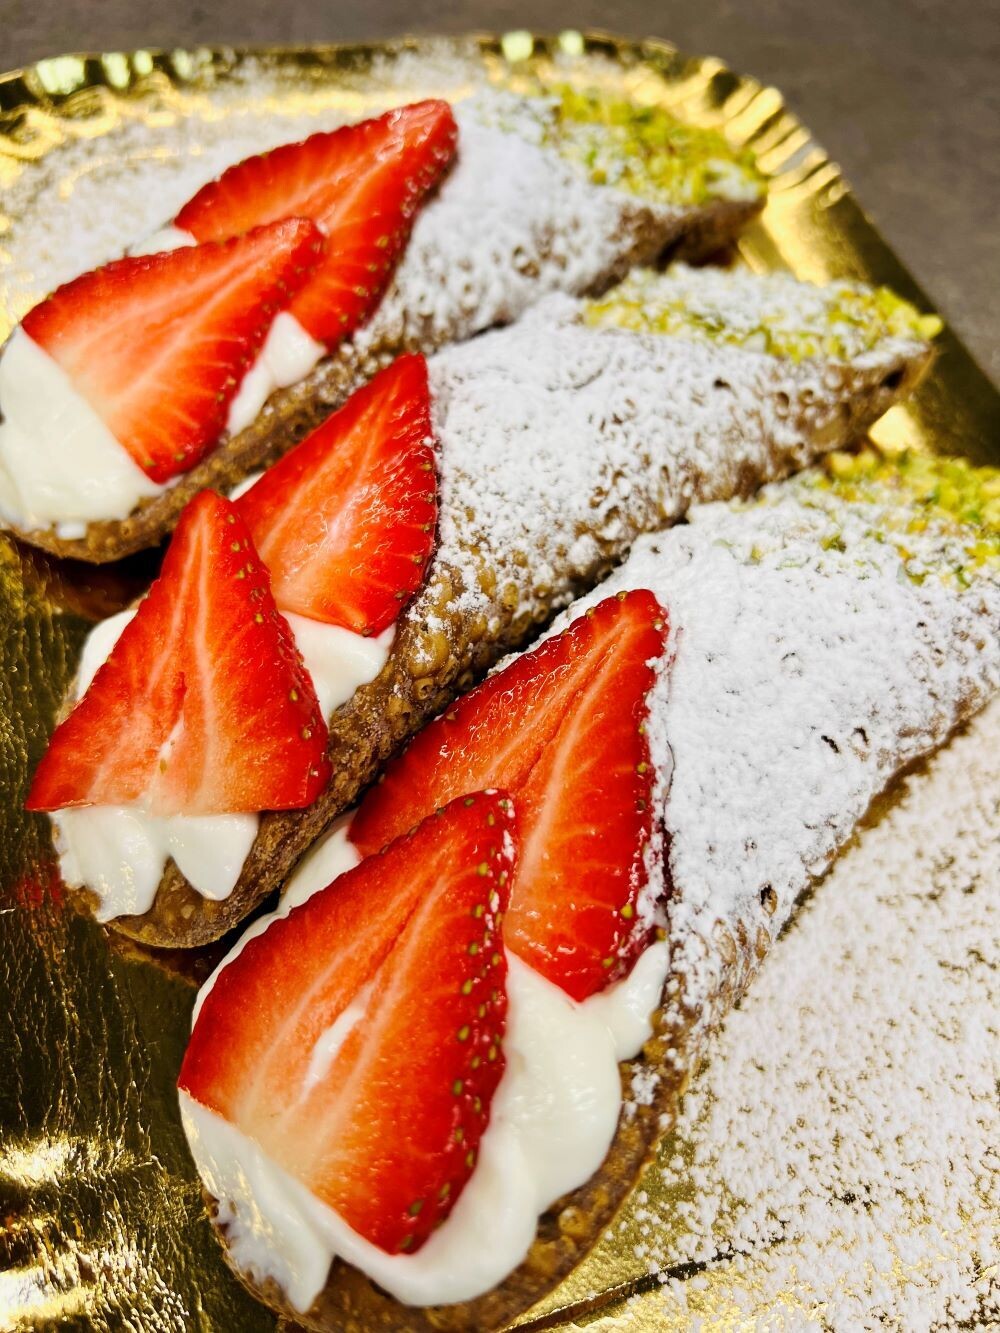 Cannoli 3 XXL size set with fresh strawberries and pistachios